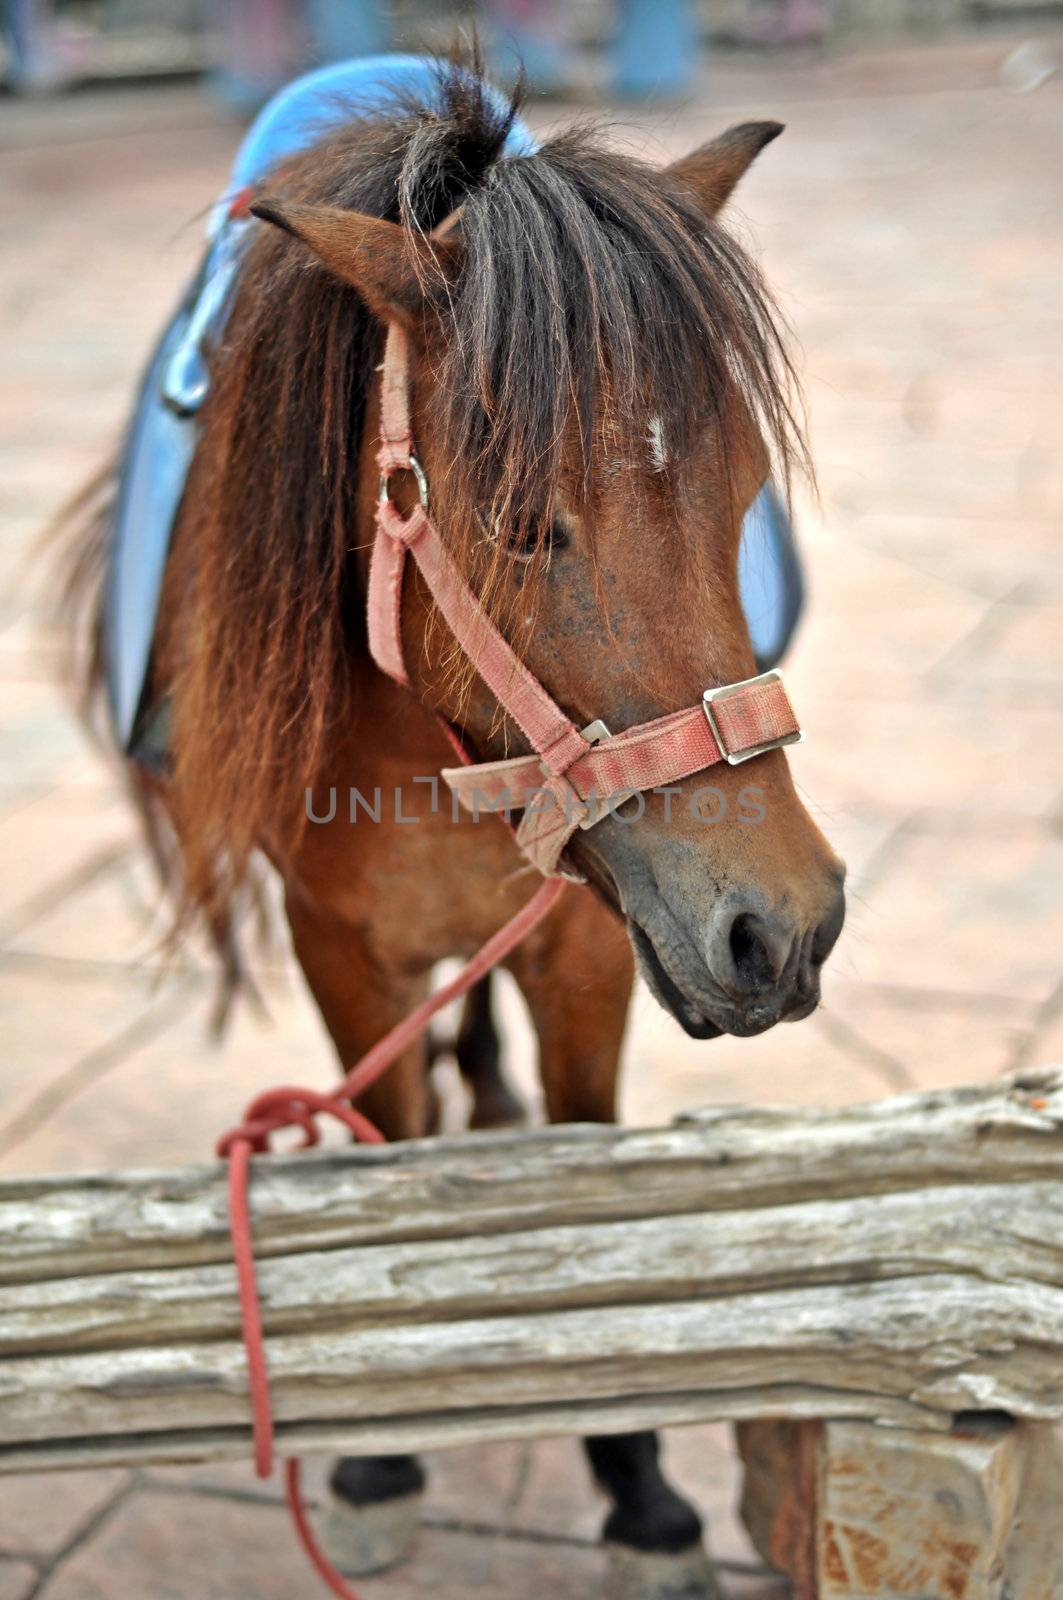 Pony have a short head, large eyes and small ears.